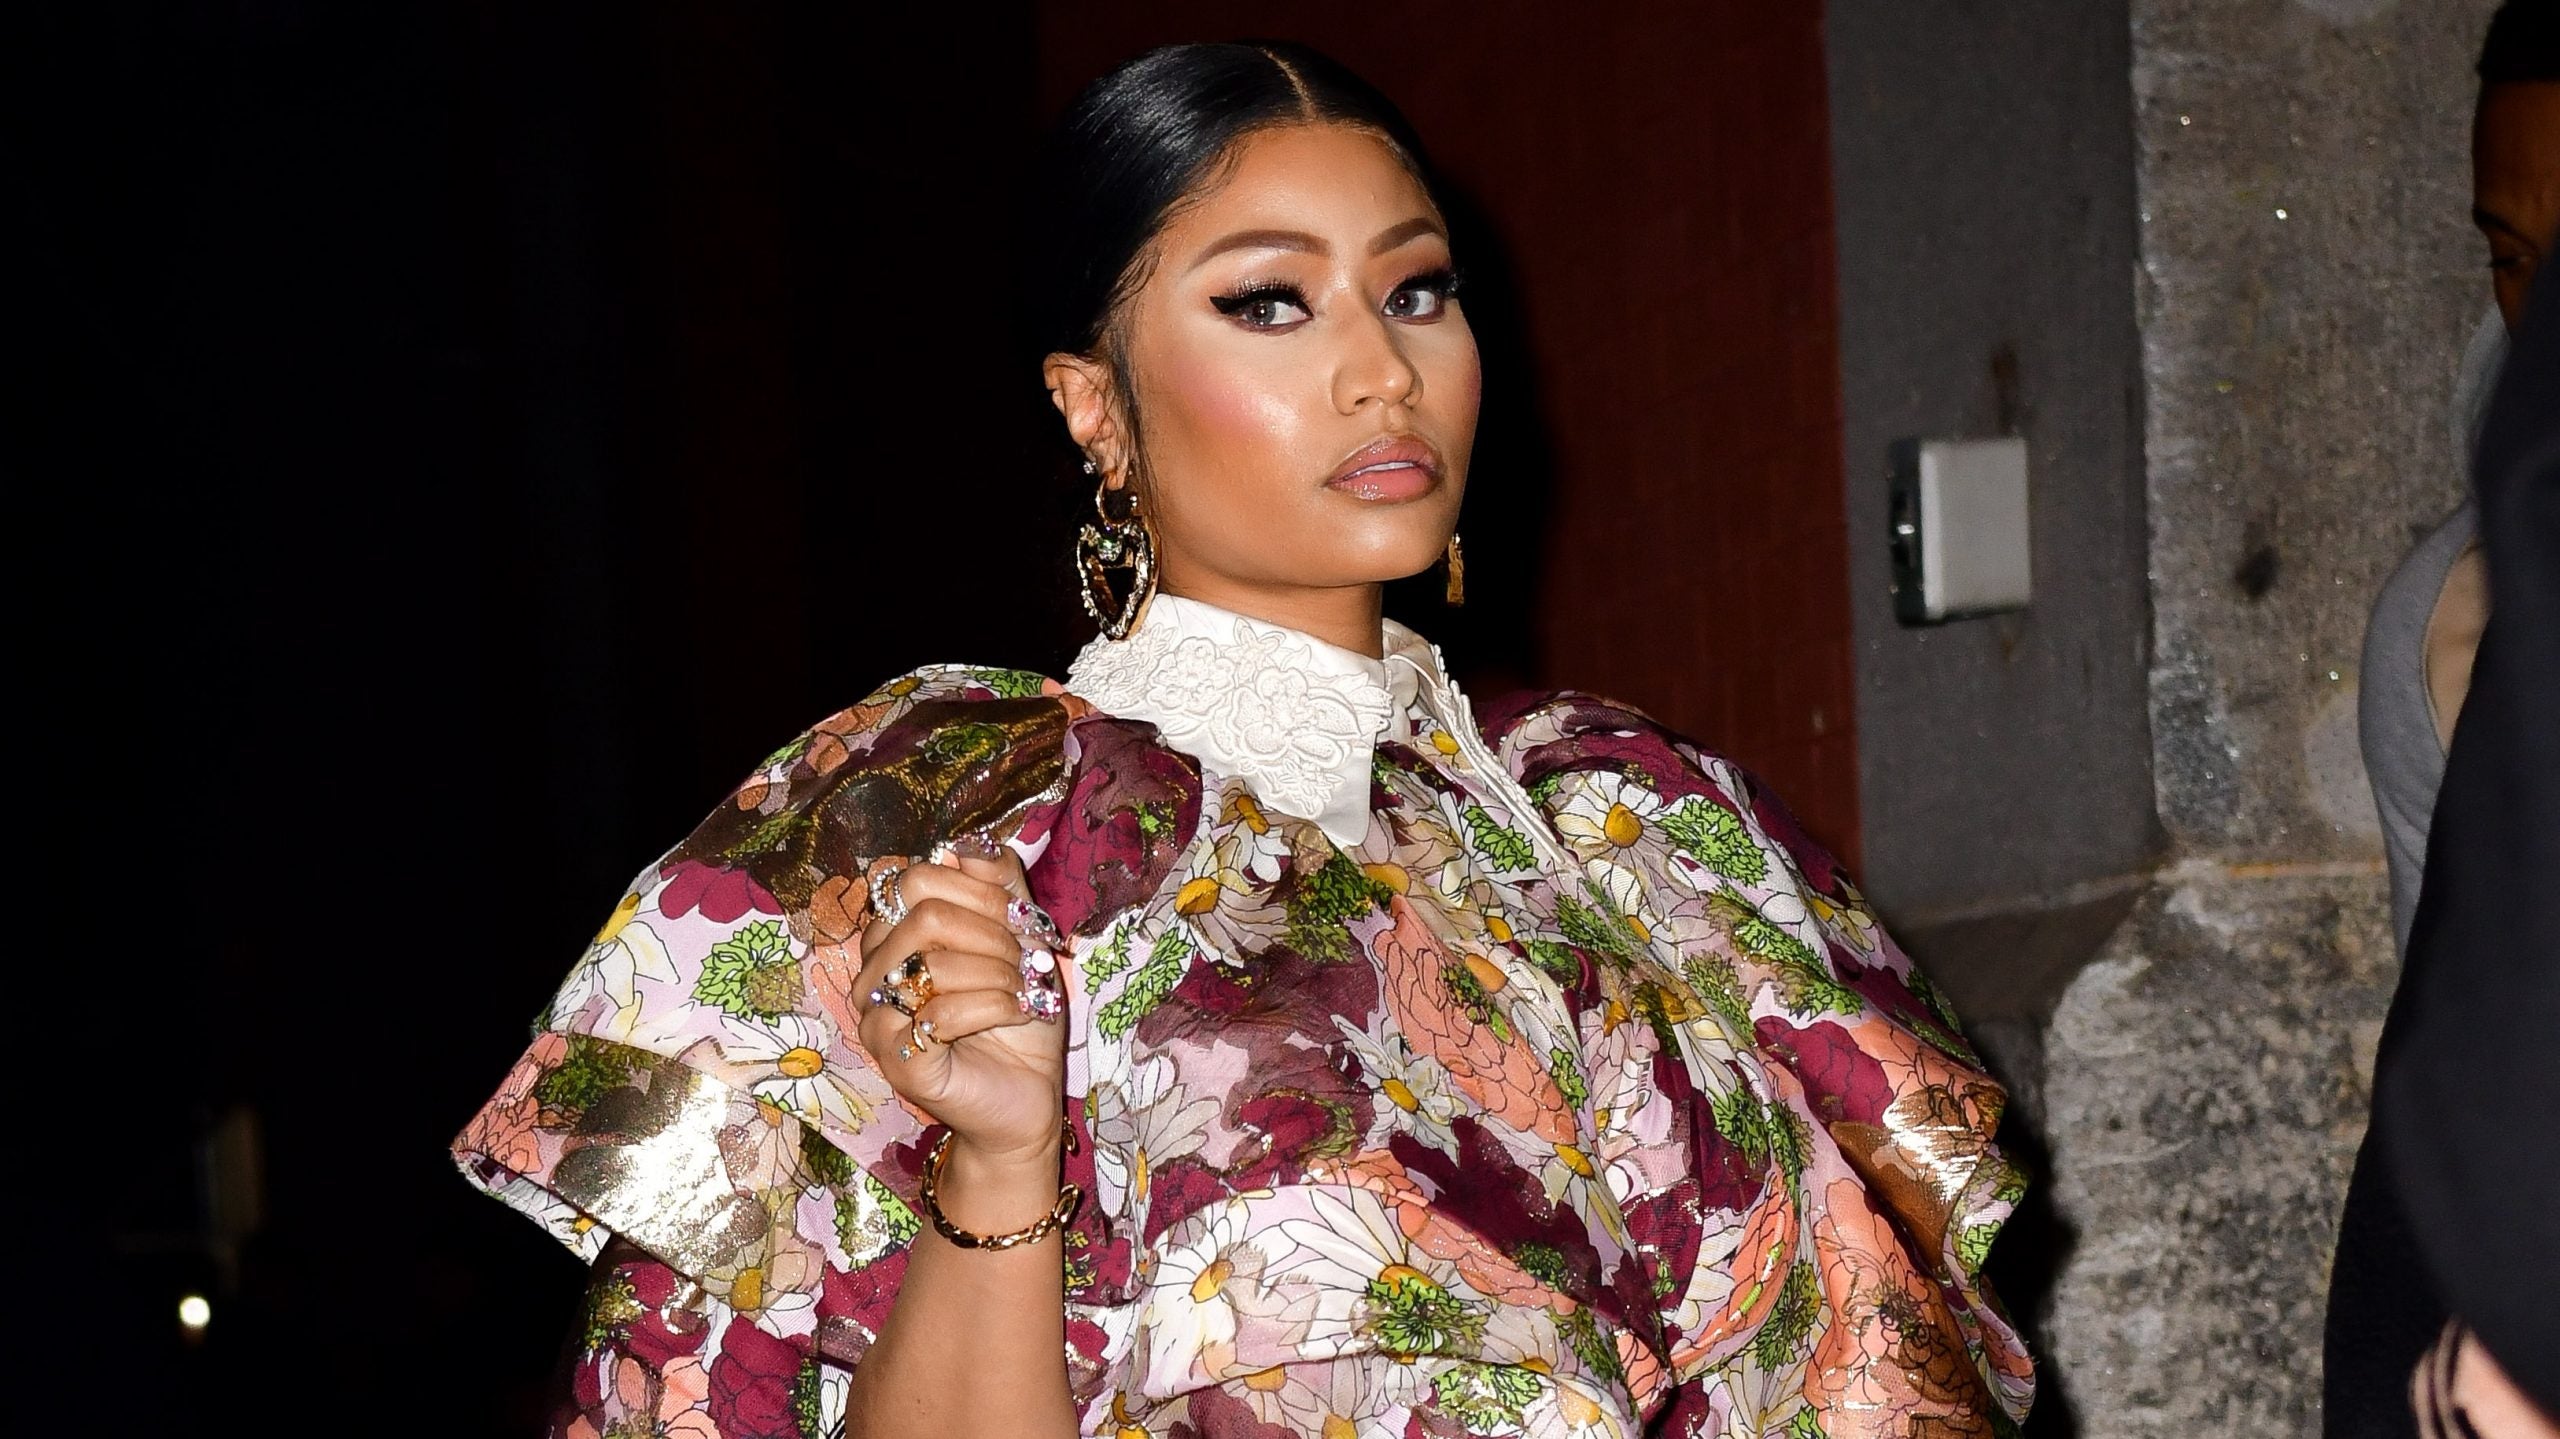 Nicki Minaj Breaks Her Silence About Her Father's Passing